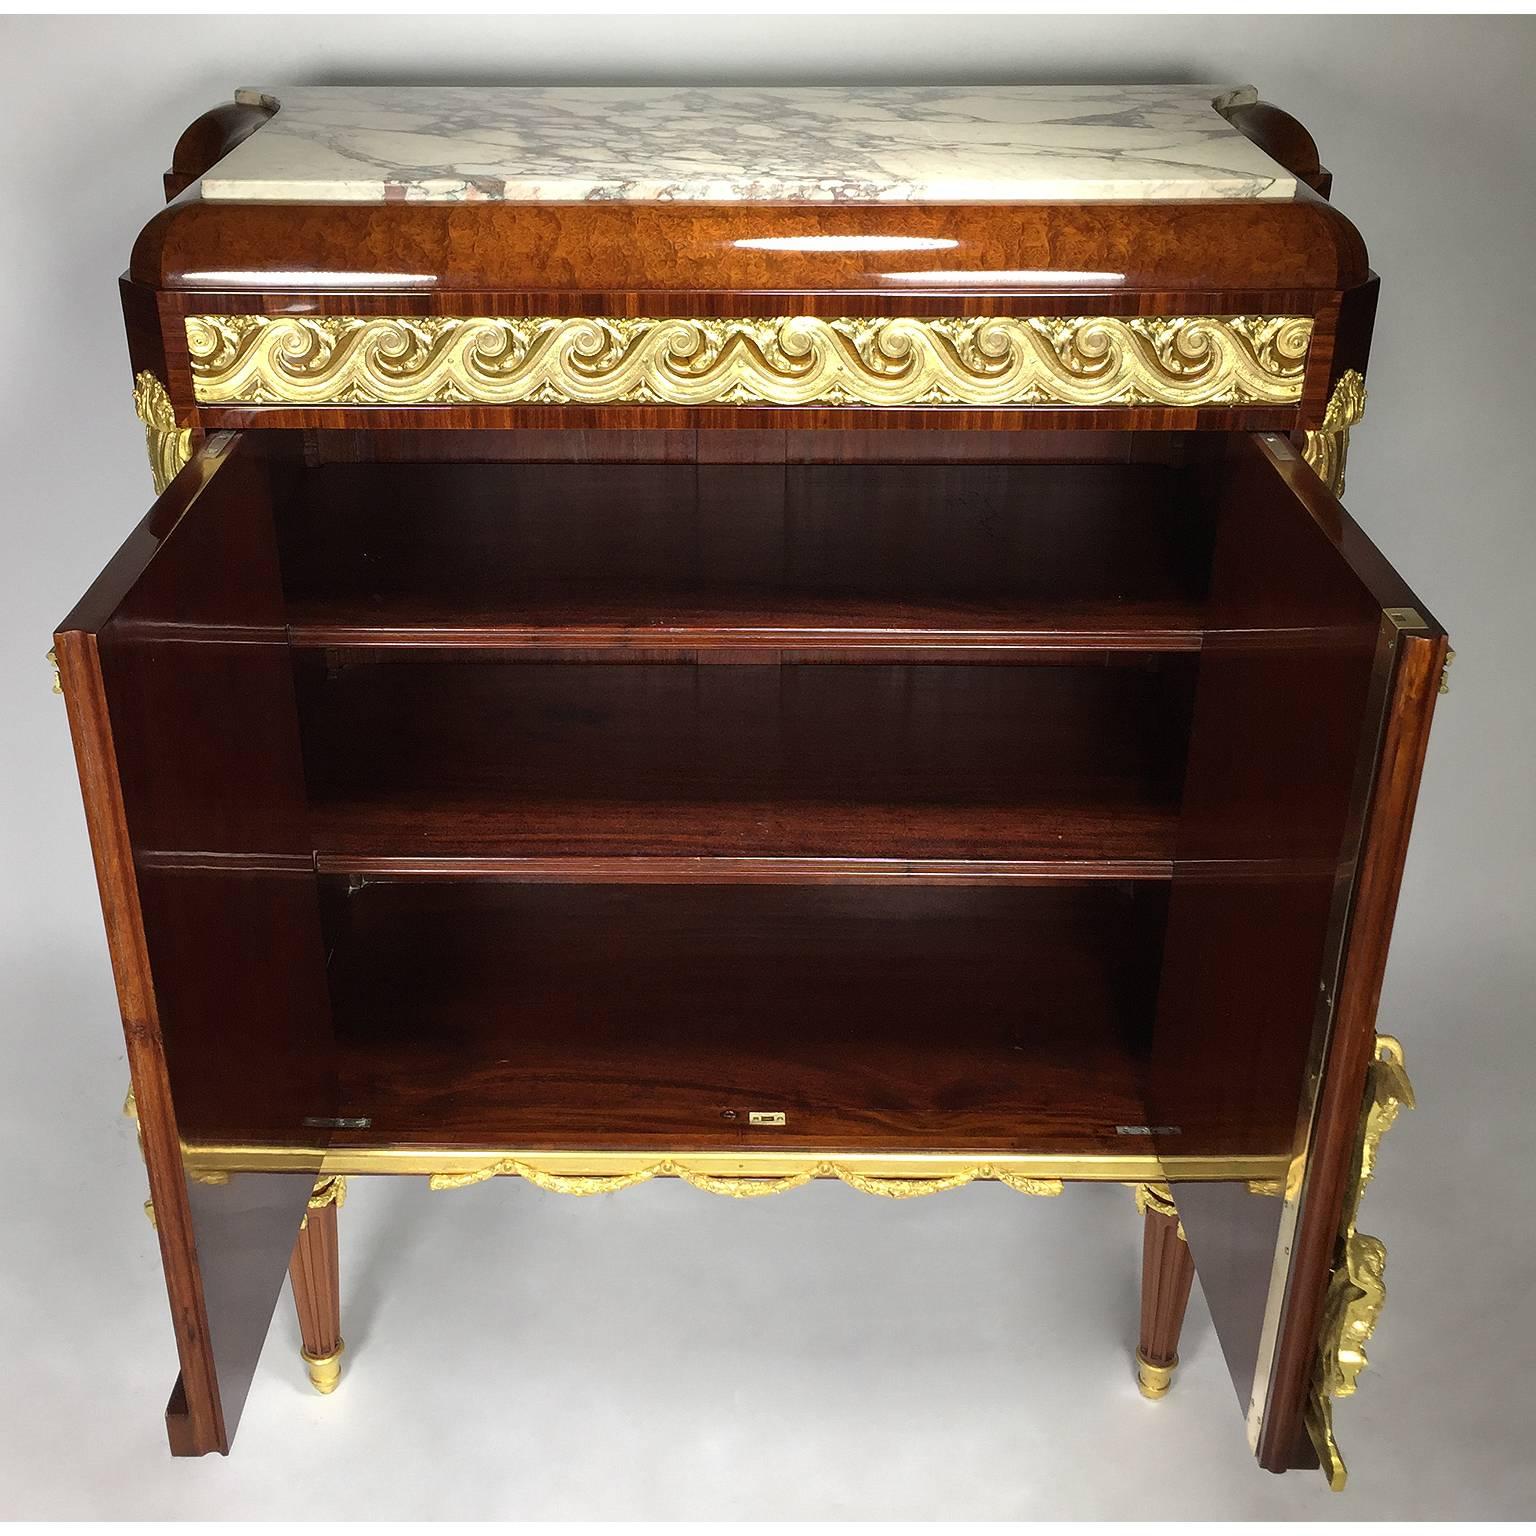 French 19th-20th Century Louis XVI Style Belle Époque Ormolu-Mounted Cabinet For Sale 2